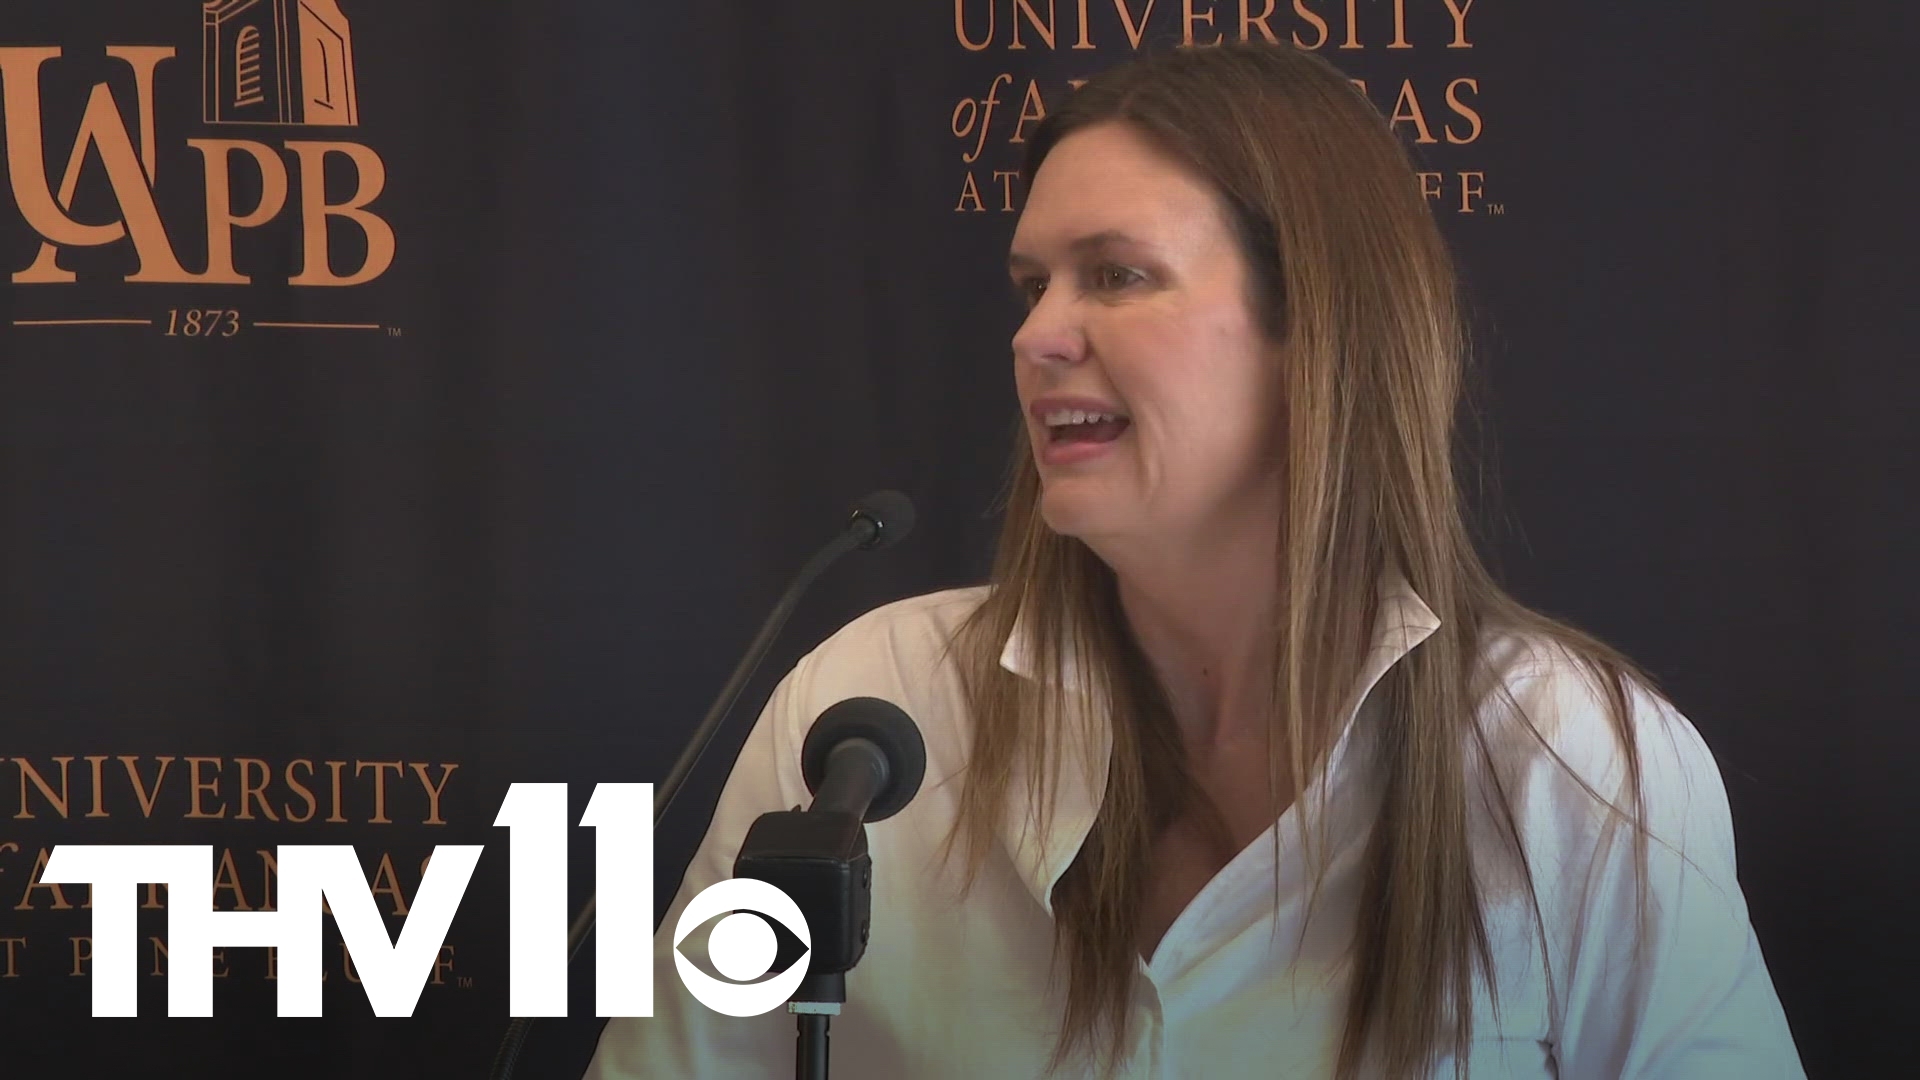 Gov. Sarah Huckabee Sanders spent most of Wednesday highlighting the work being done in Pine Bluff. She also stopped at UAPB to make a significant announcement.